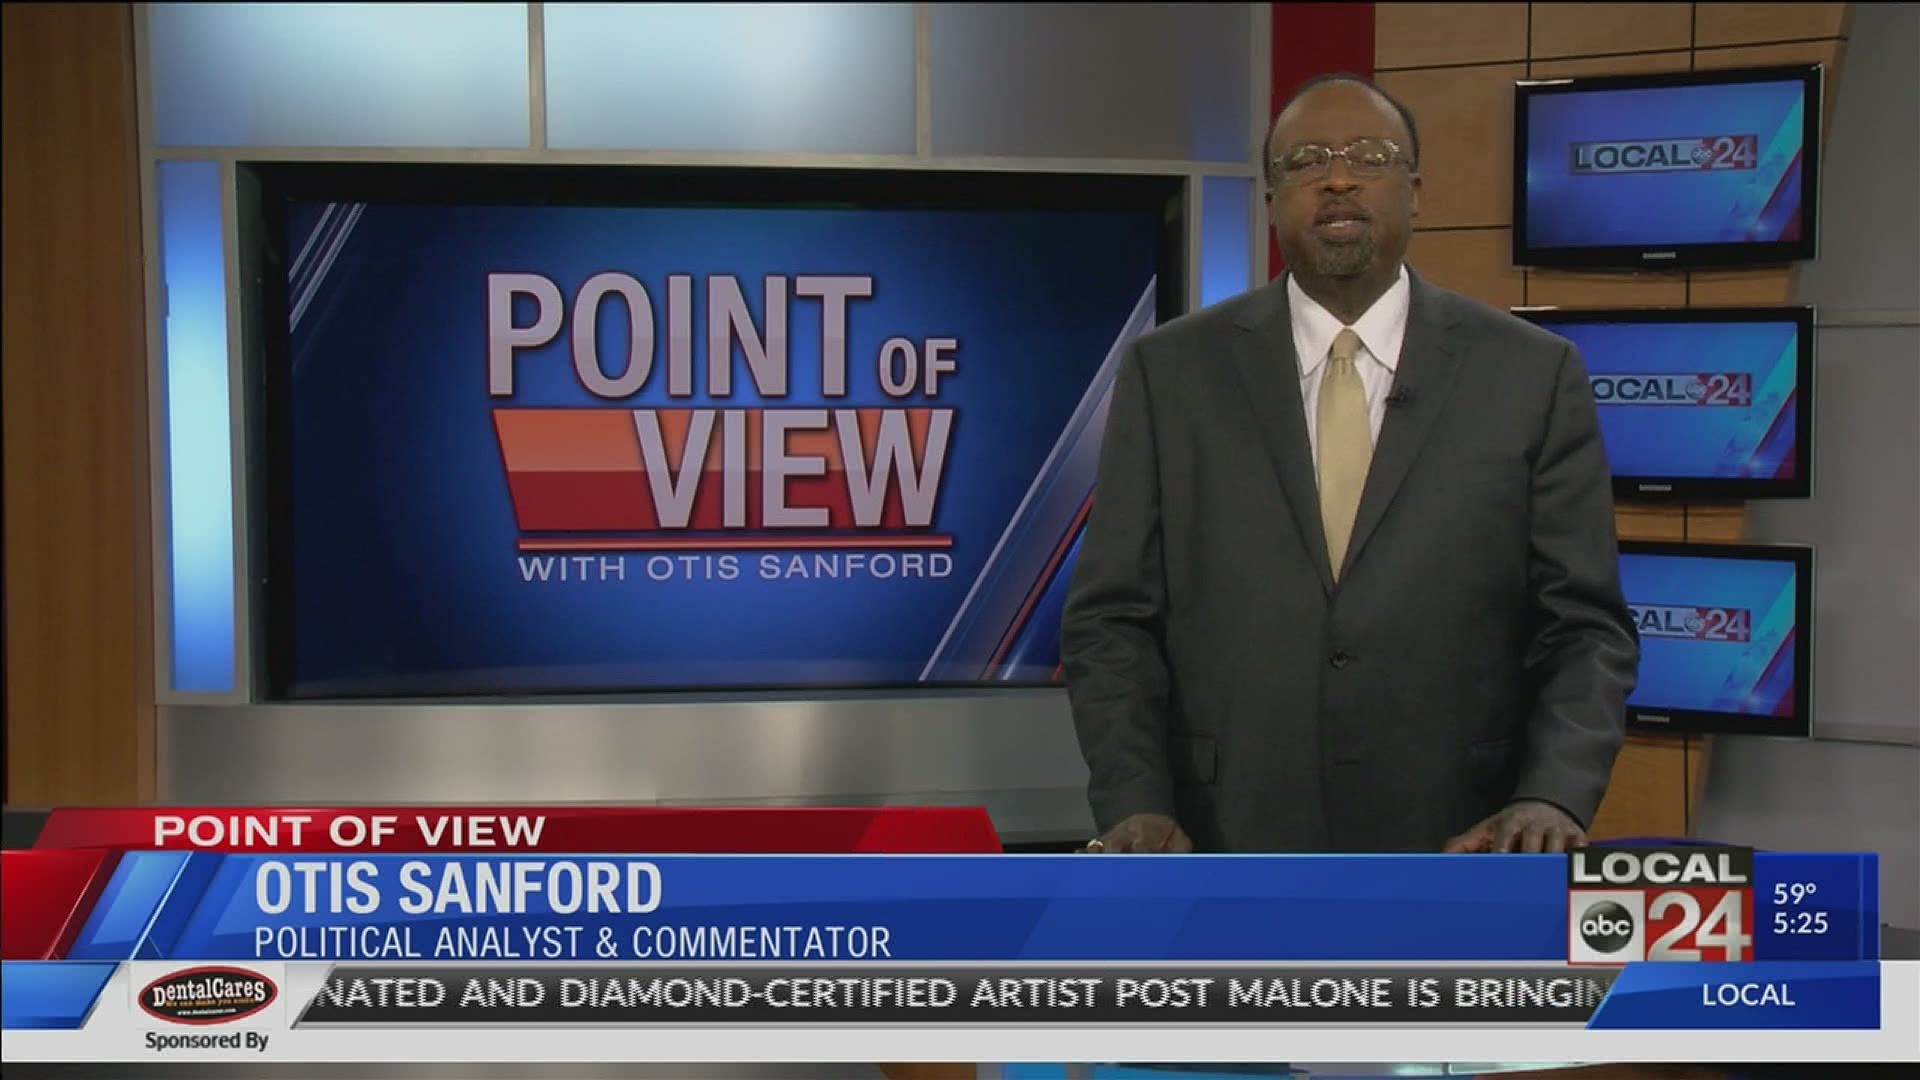 Local 24 News political analyst & commentator Otis Sanford shares his point of view on lawmakers meeting while Middle TN dealt with the aftermath of tornadoes.